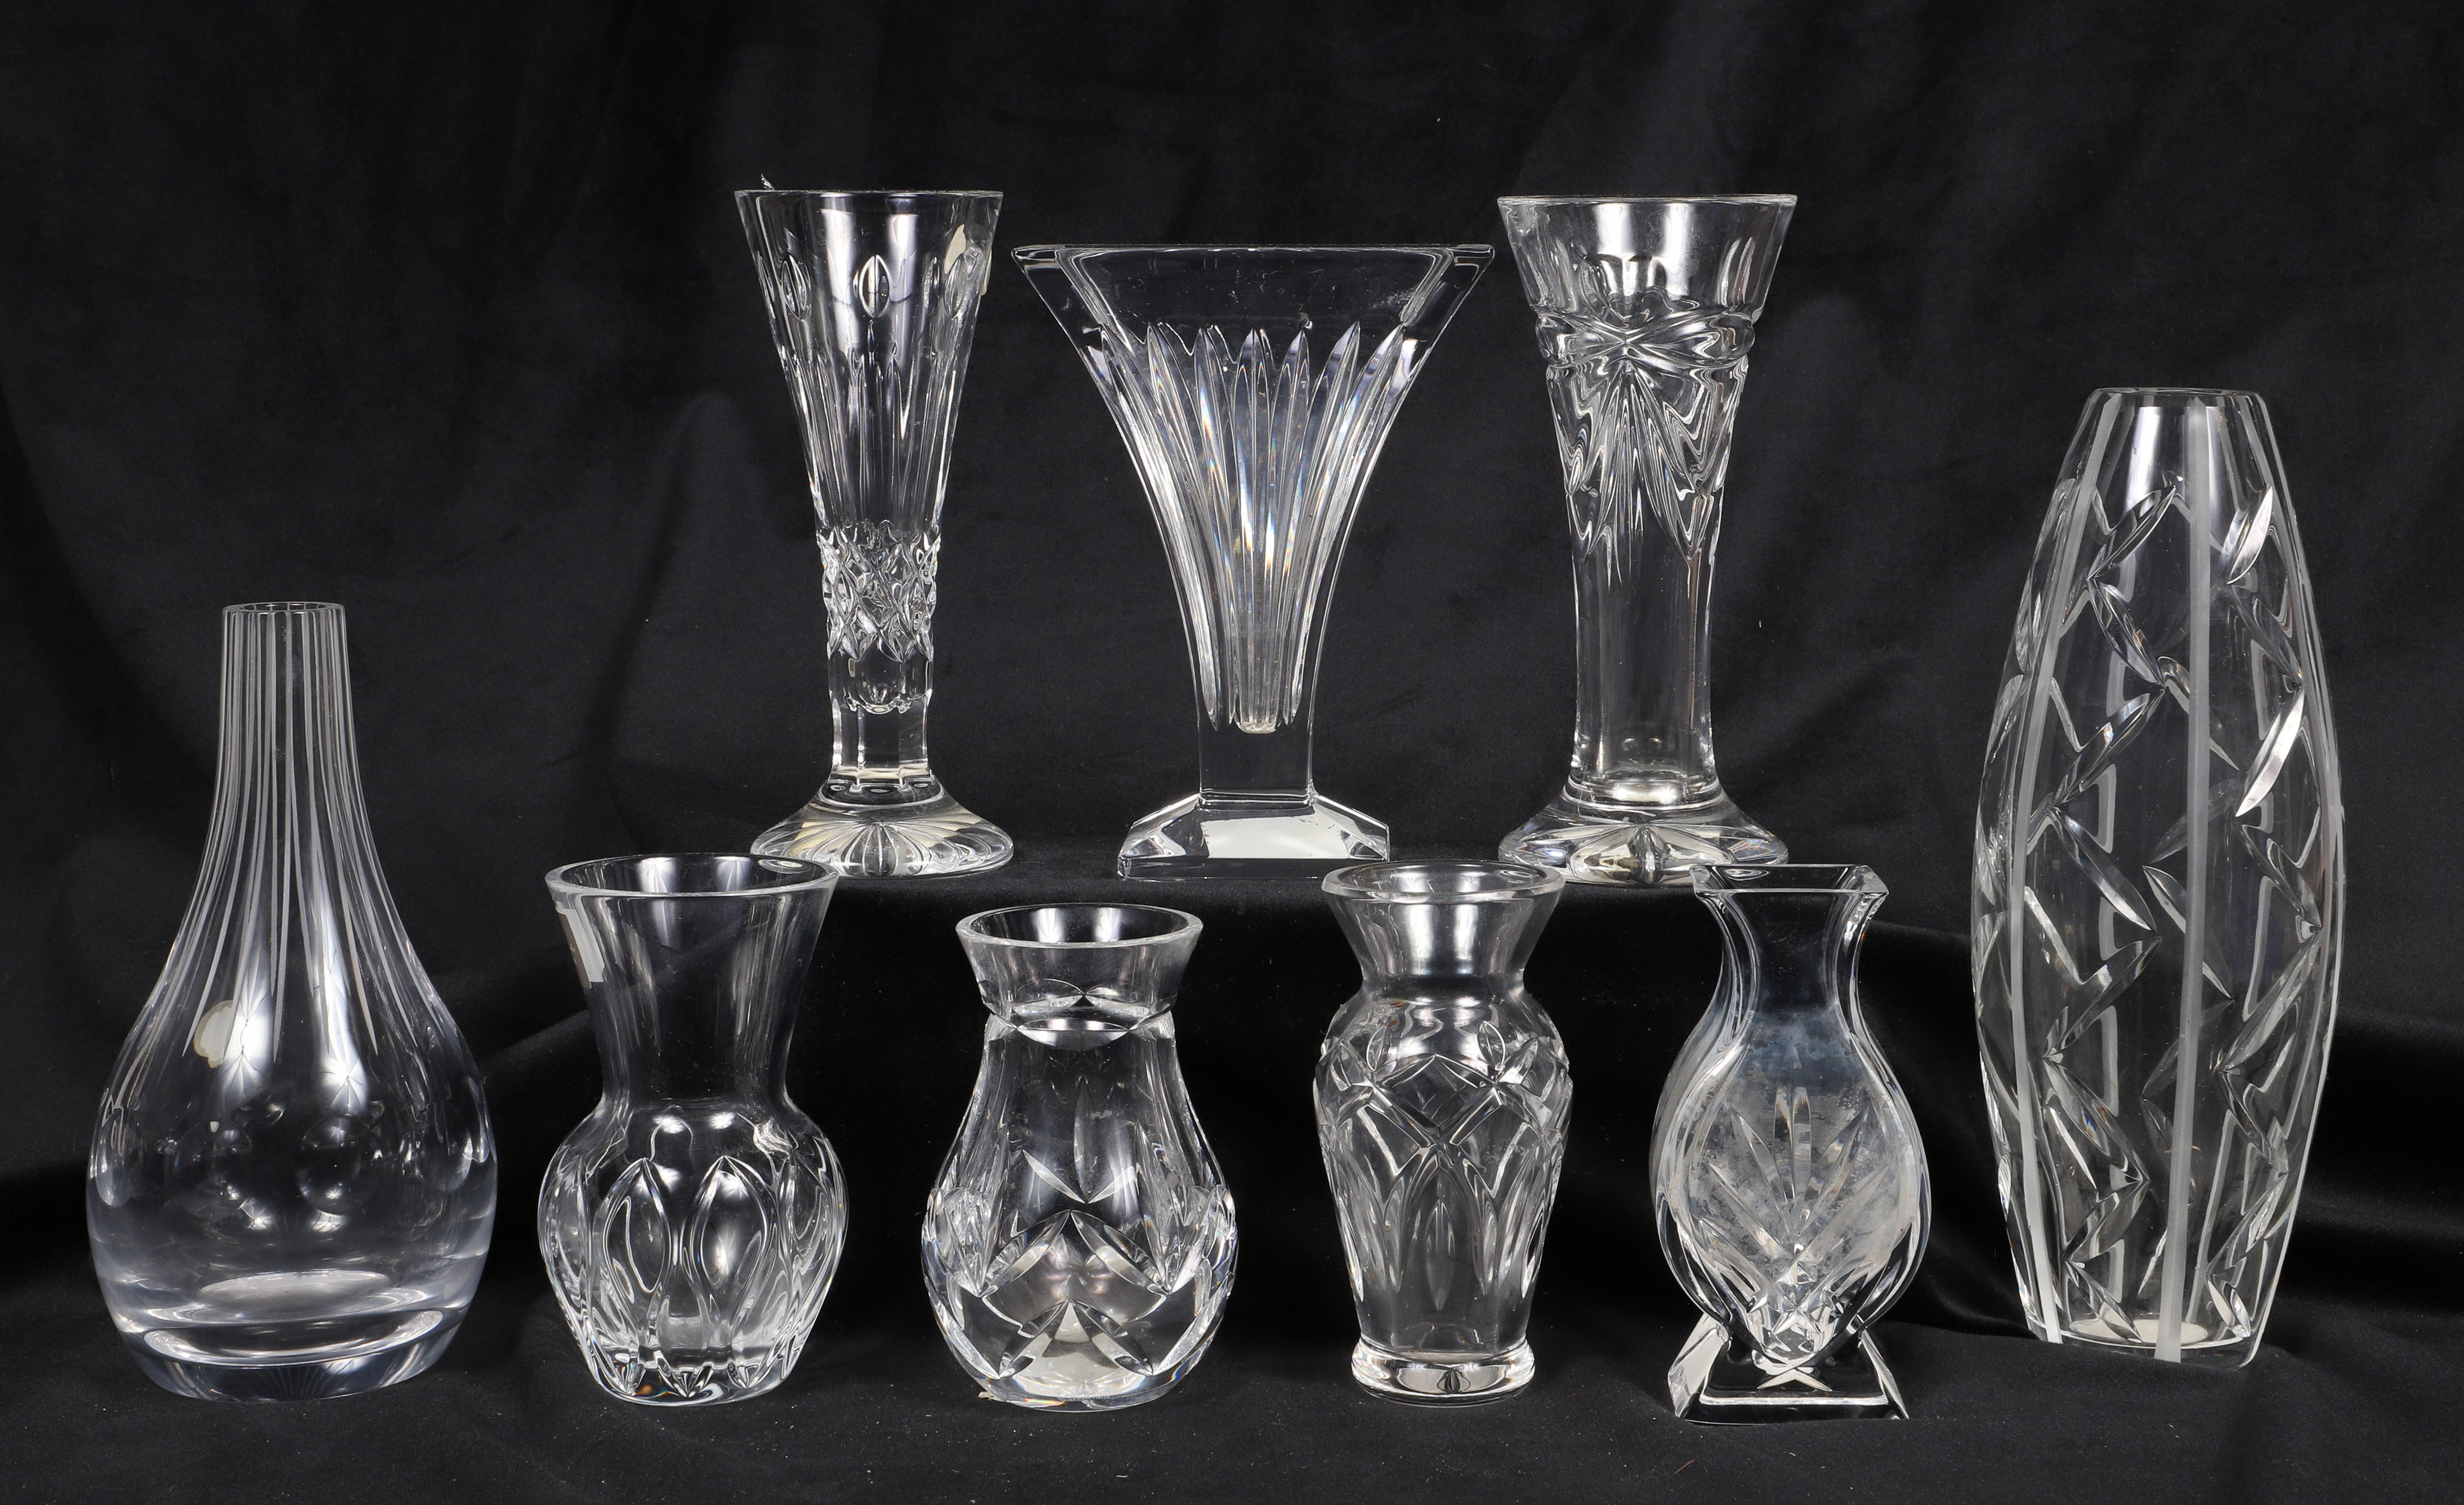  9 Waterford crystal bud vases  2e190f